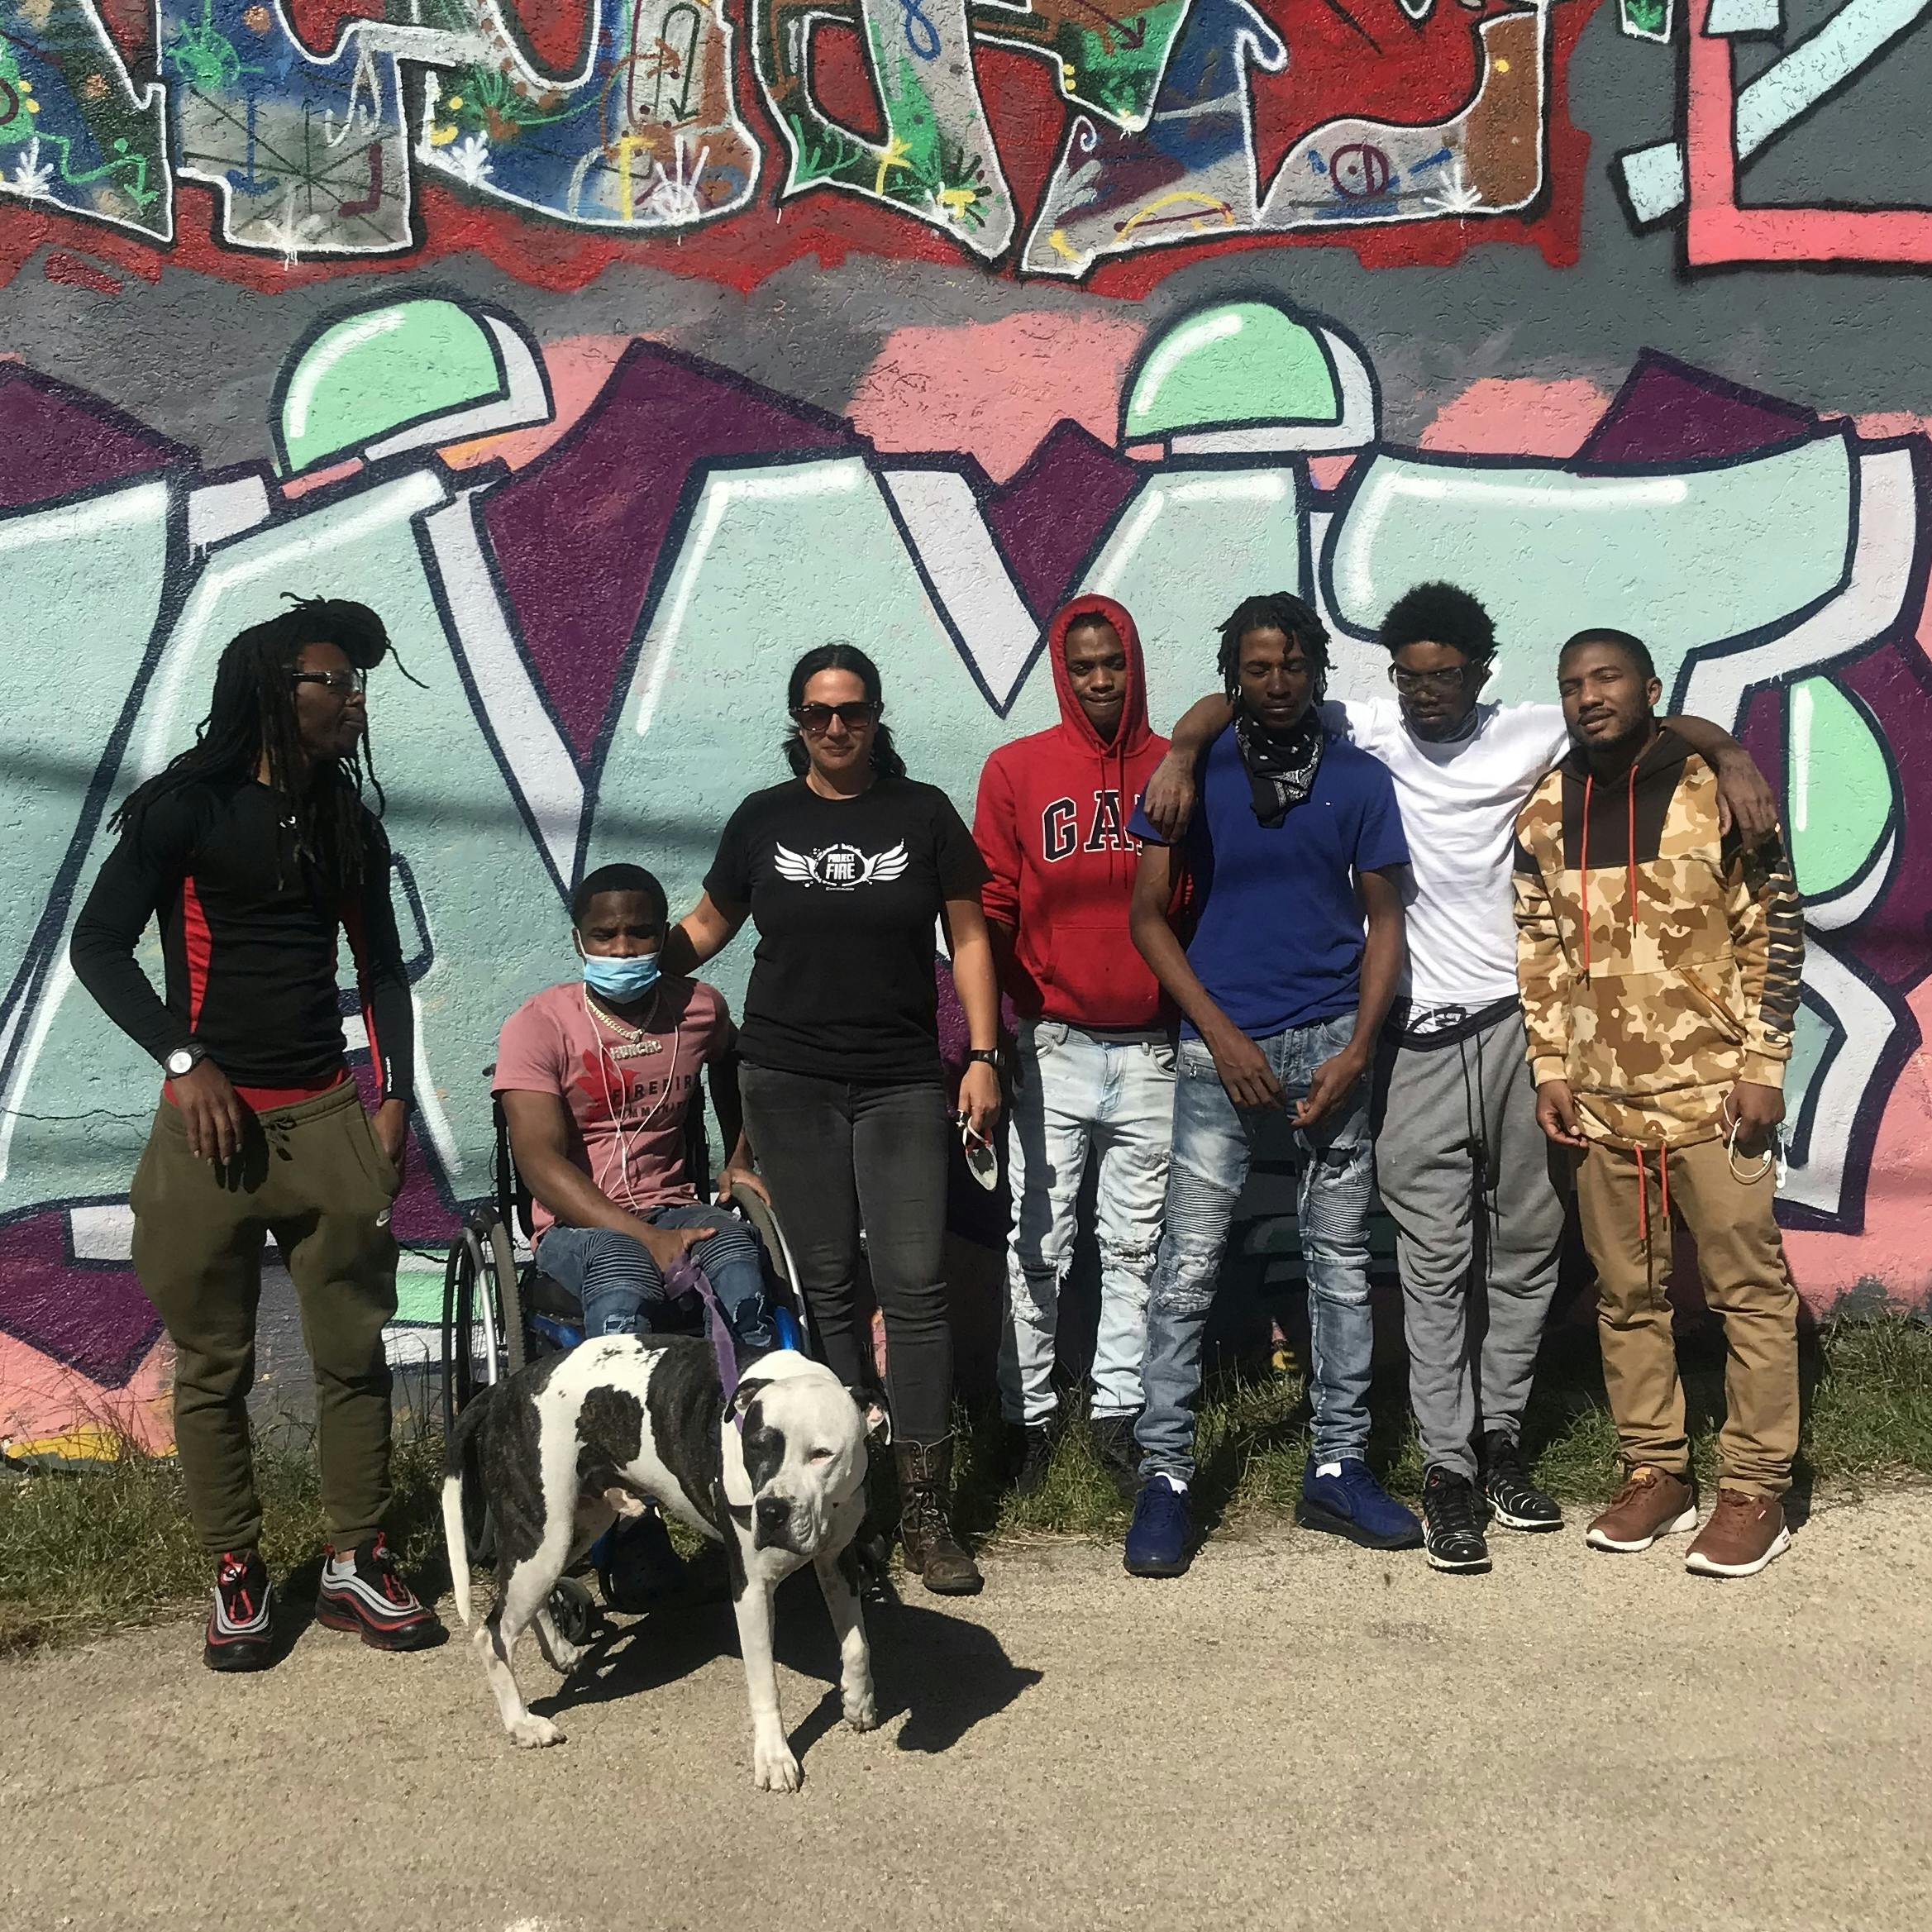 Row of people posed in front of a graffitied wall with a pitbull